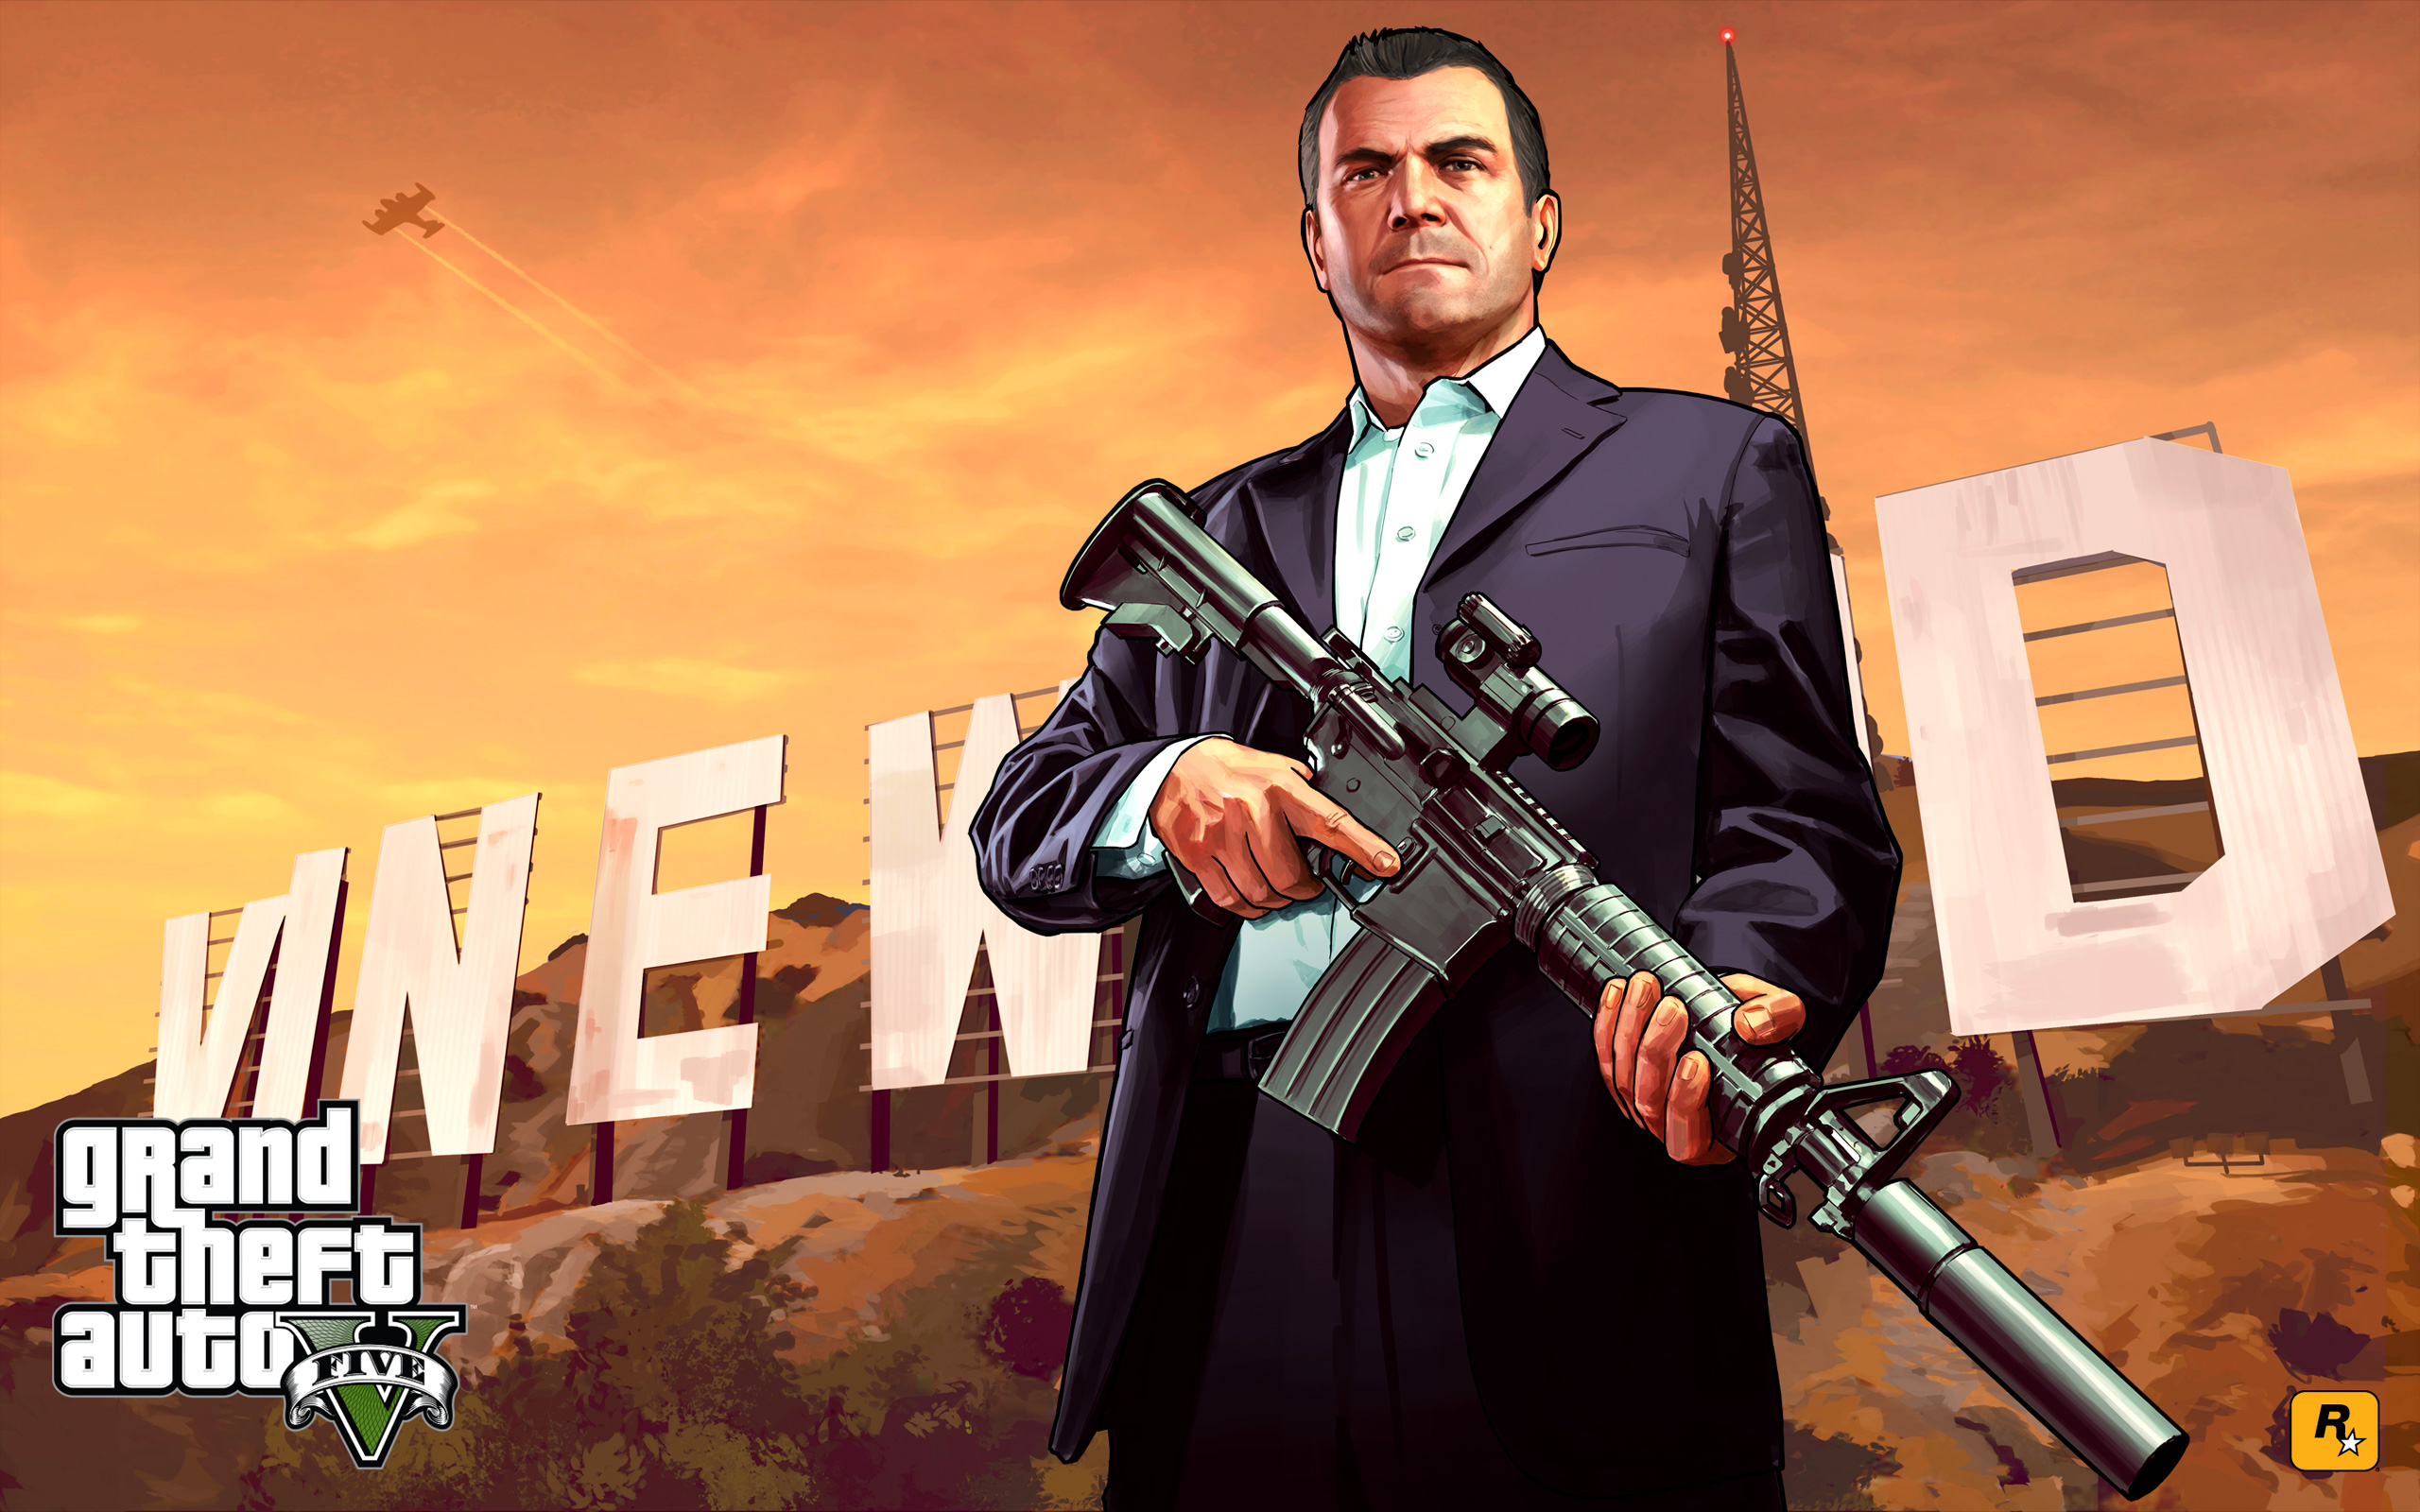 grand theft auto 5 wallpapers (16) | HD Wallpapers - 2560 x 1600 jpeg 860kB